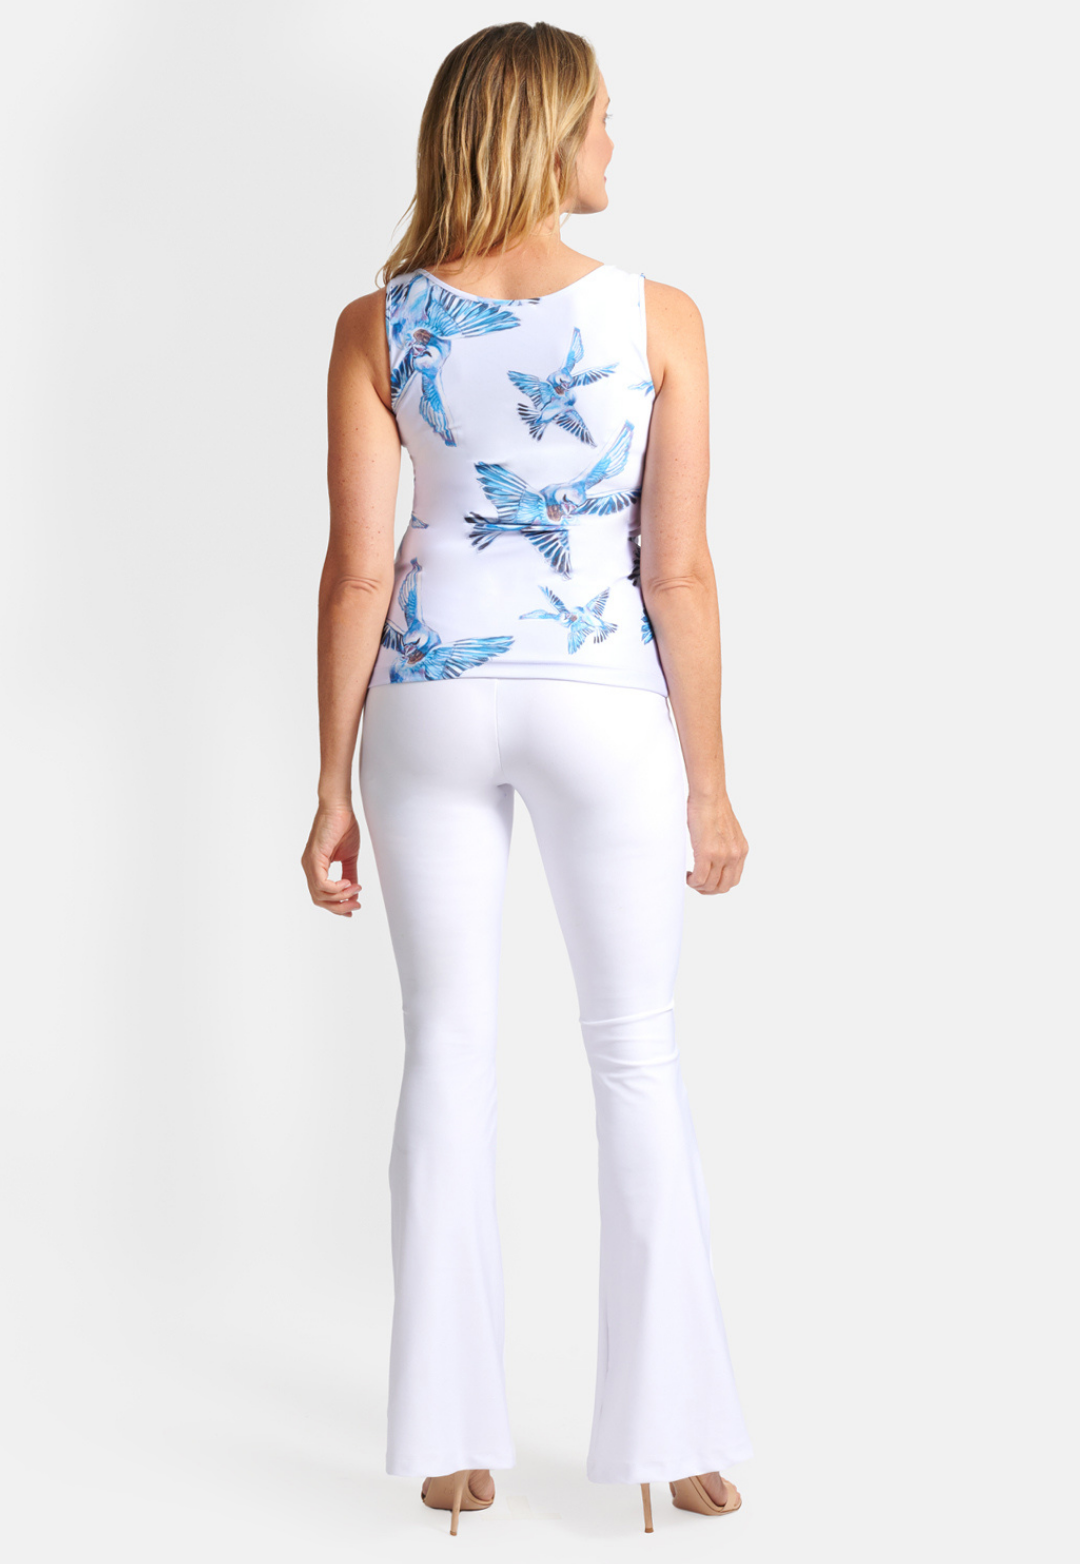 woman wearing love birds lavender printed stretch knit v neck tank top and stretch knit white pants by Ala von Auersperg